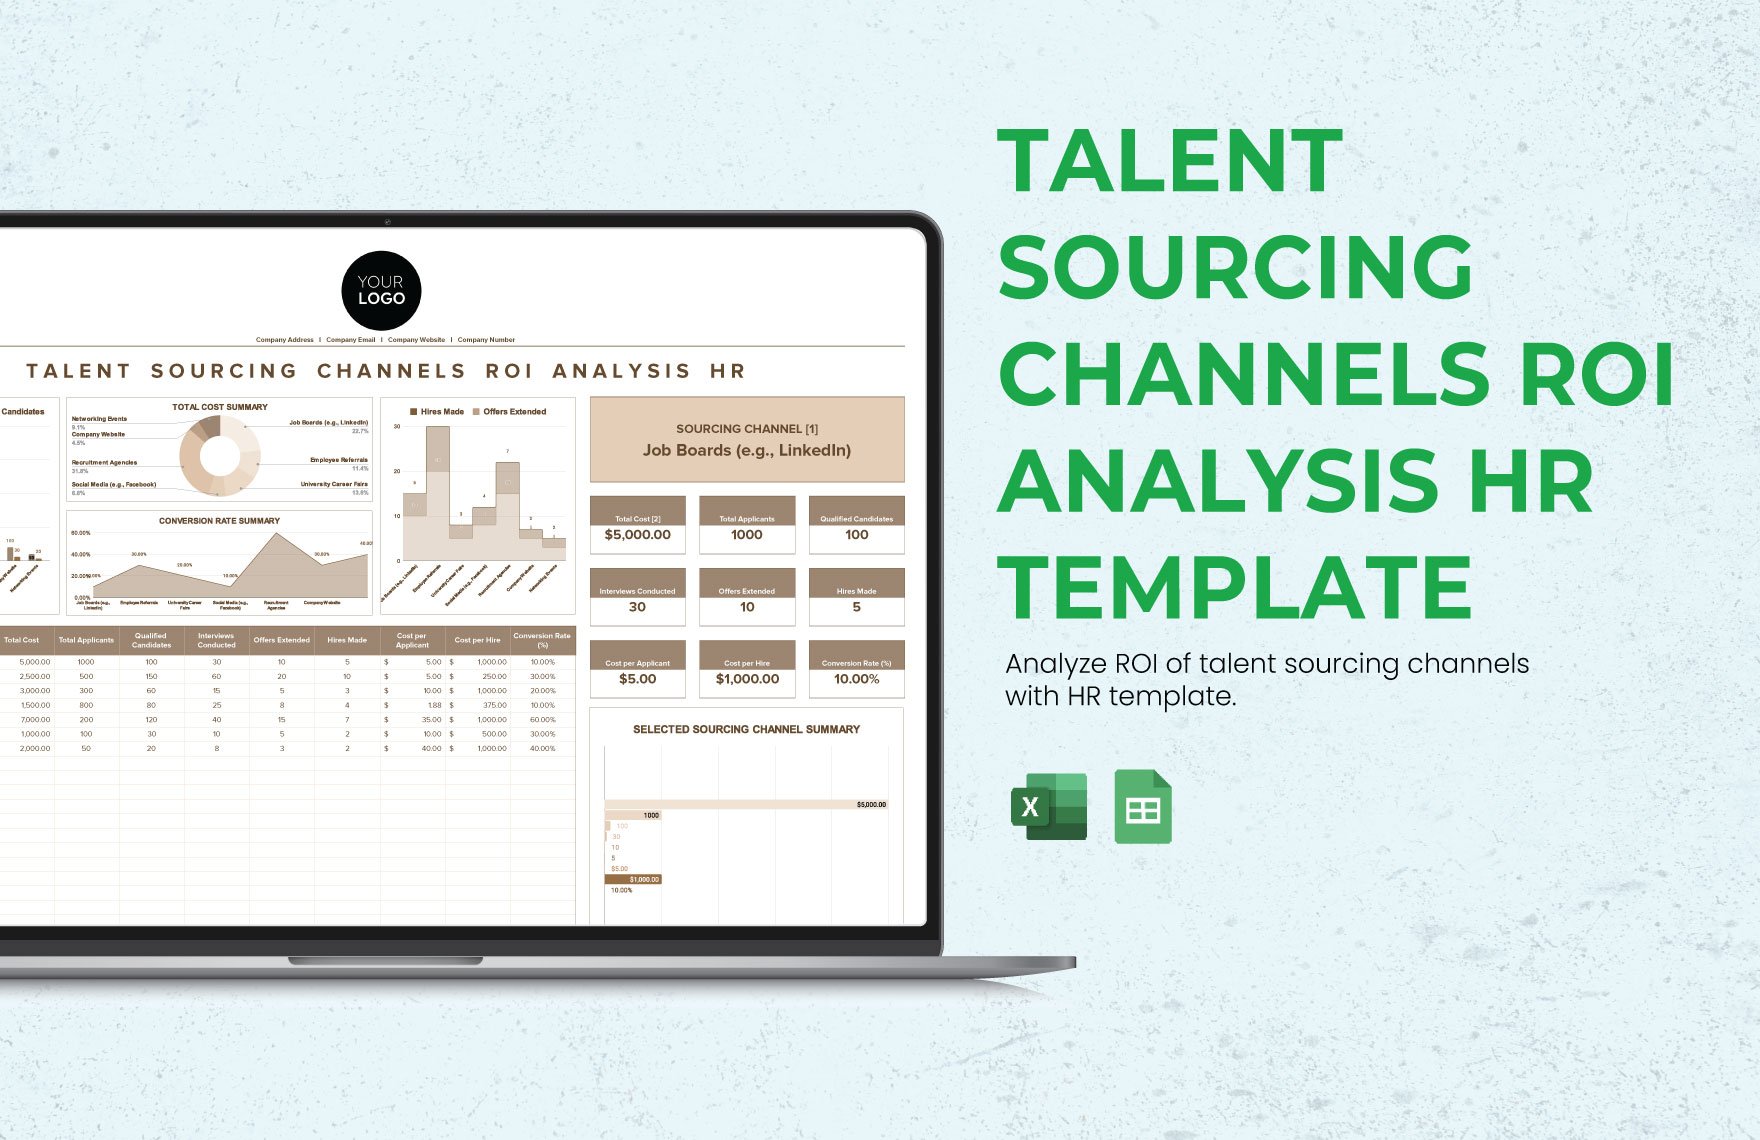 Talent Sourcing Channels ROI Analysis HR Template